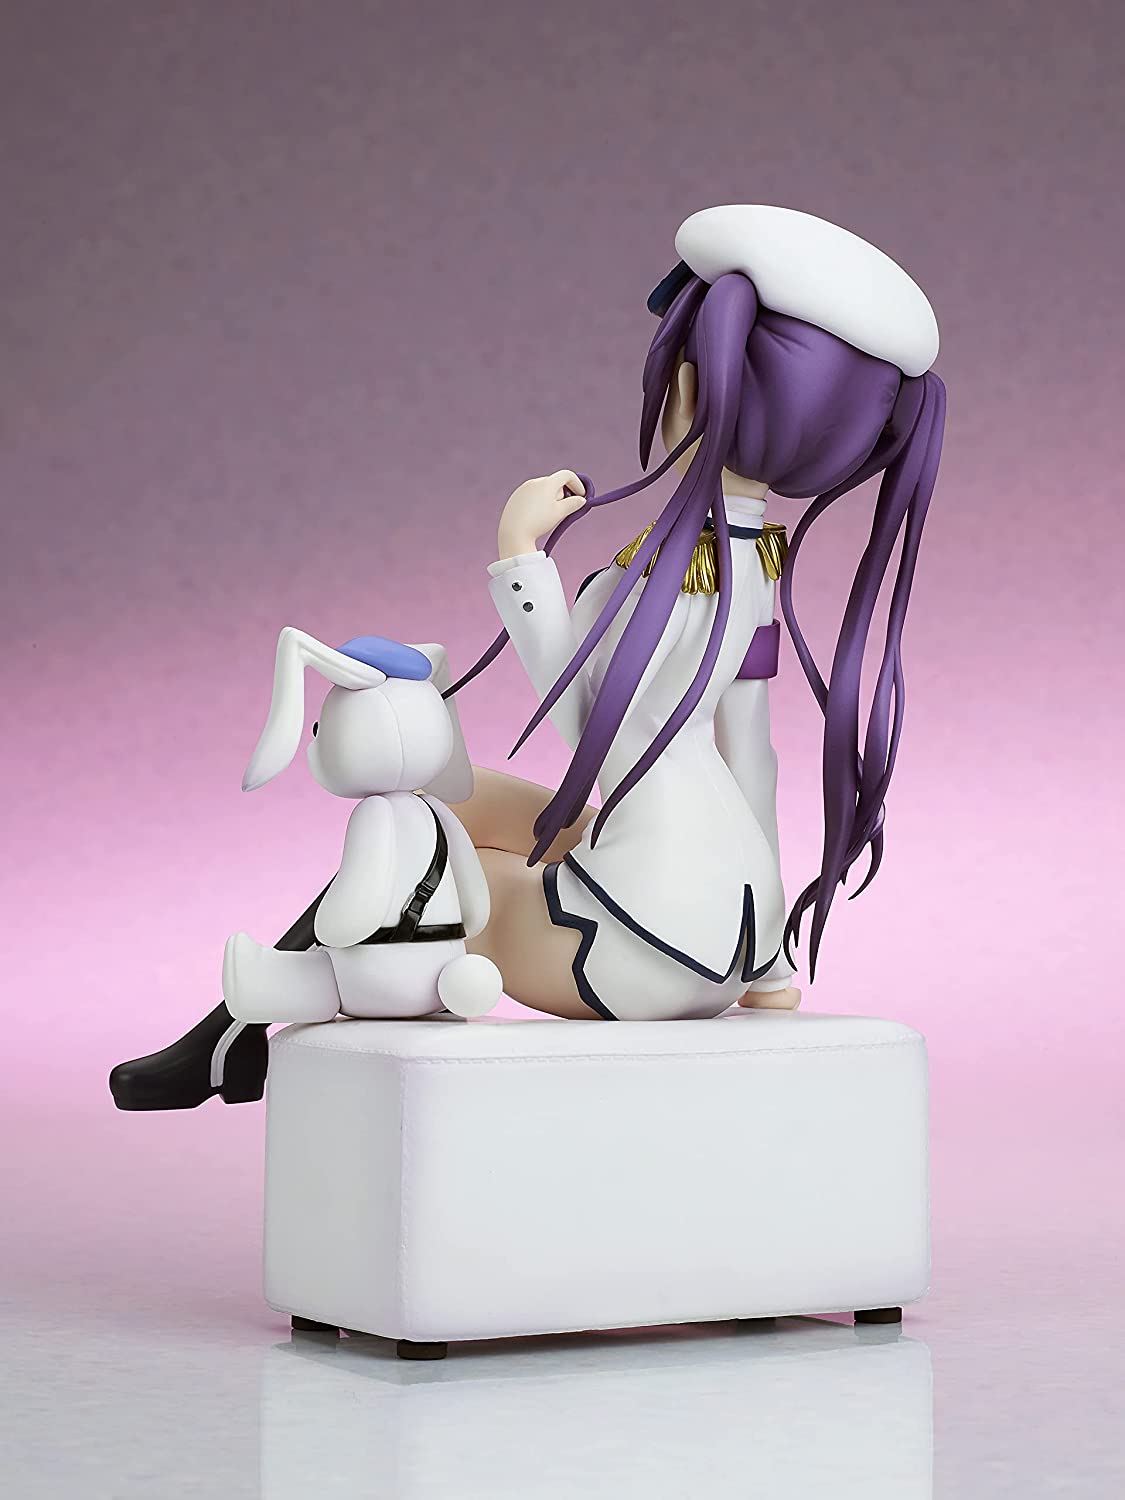 Is the order a rabbit? BLOOM Rize Military Uniform ver. 1/7 Complete Figure | animota